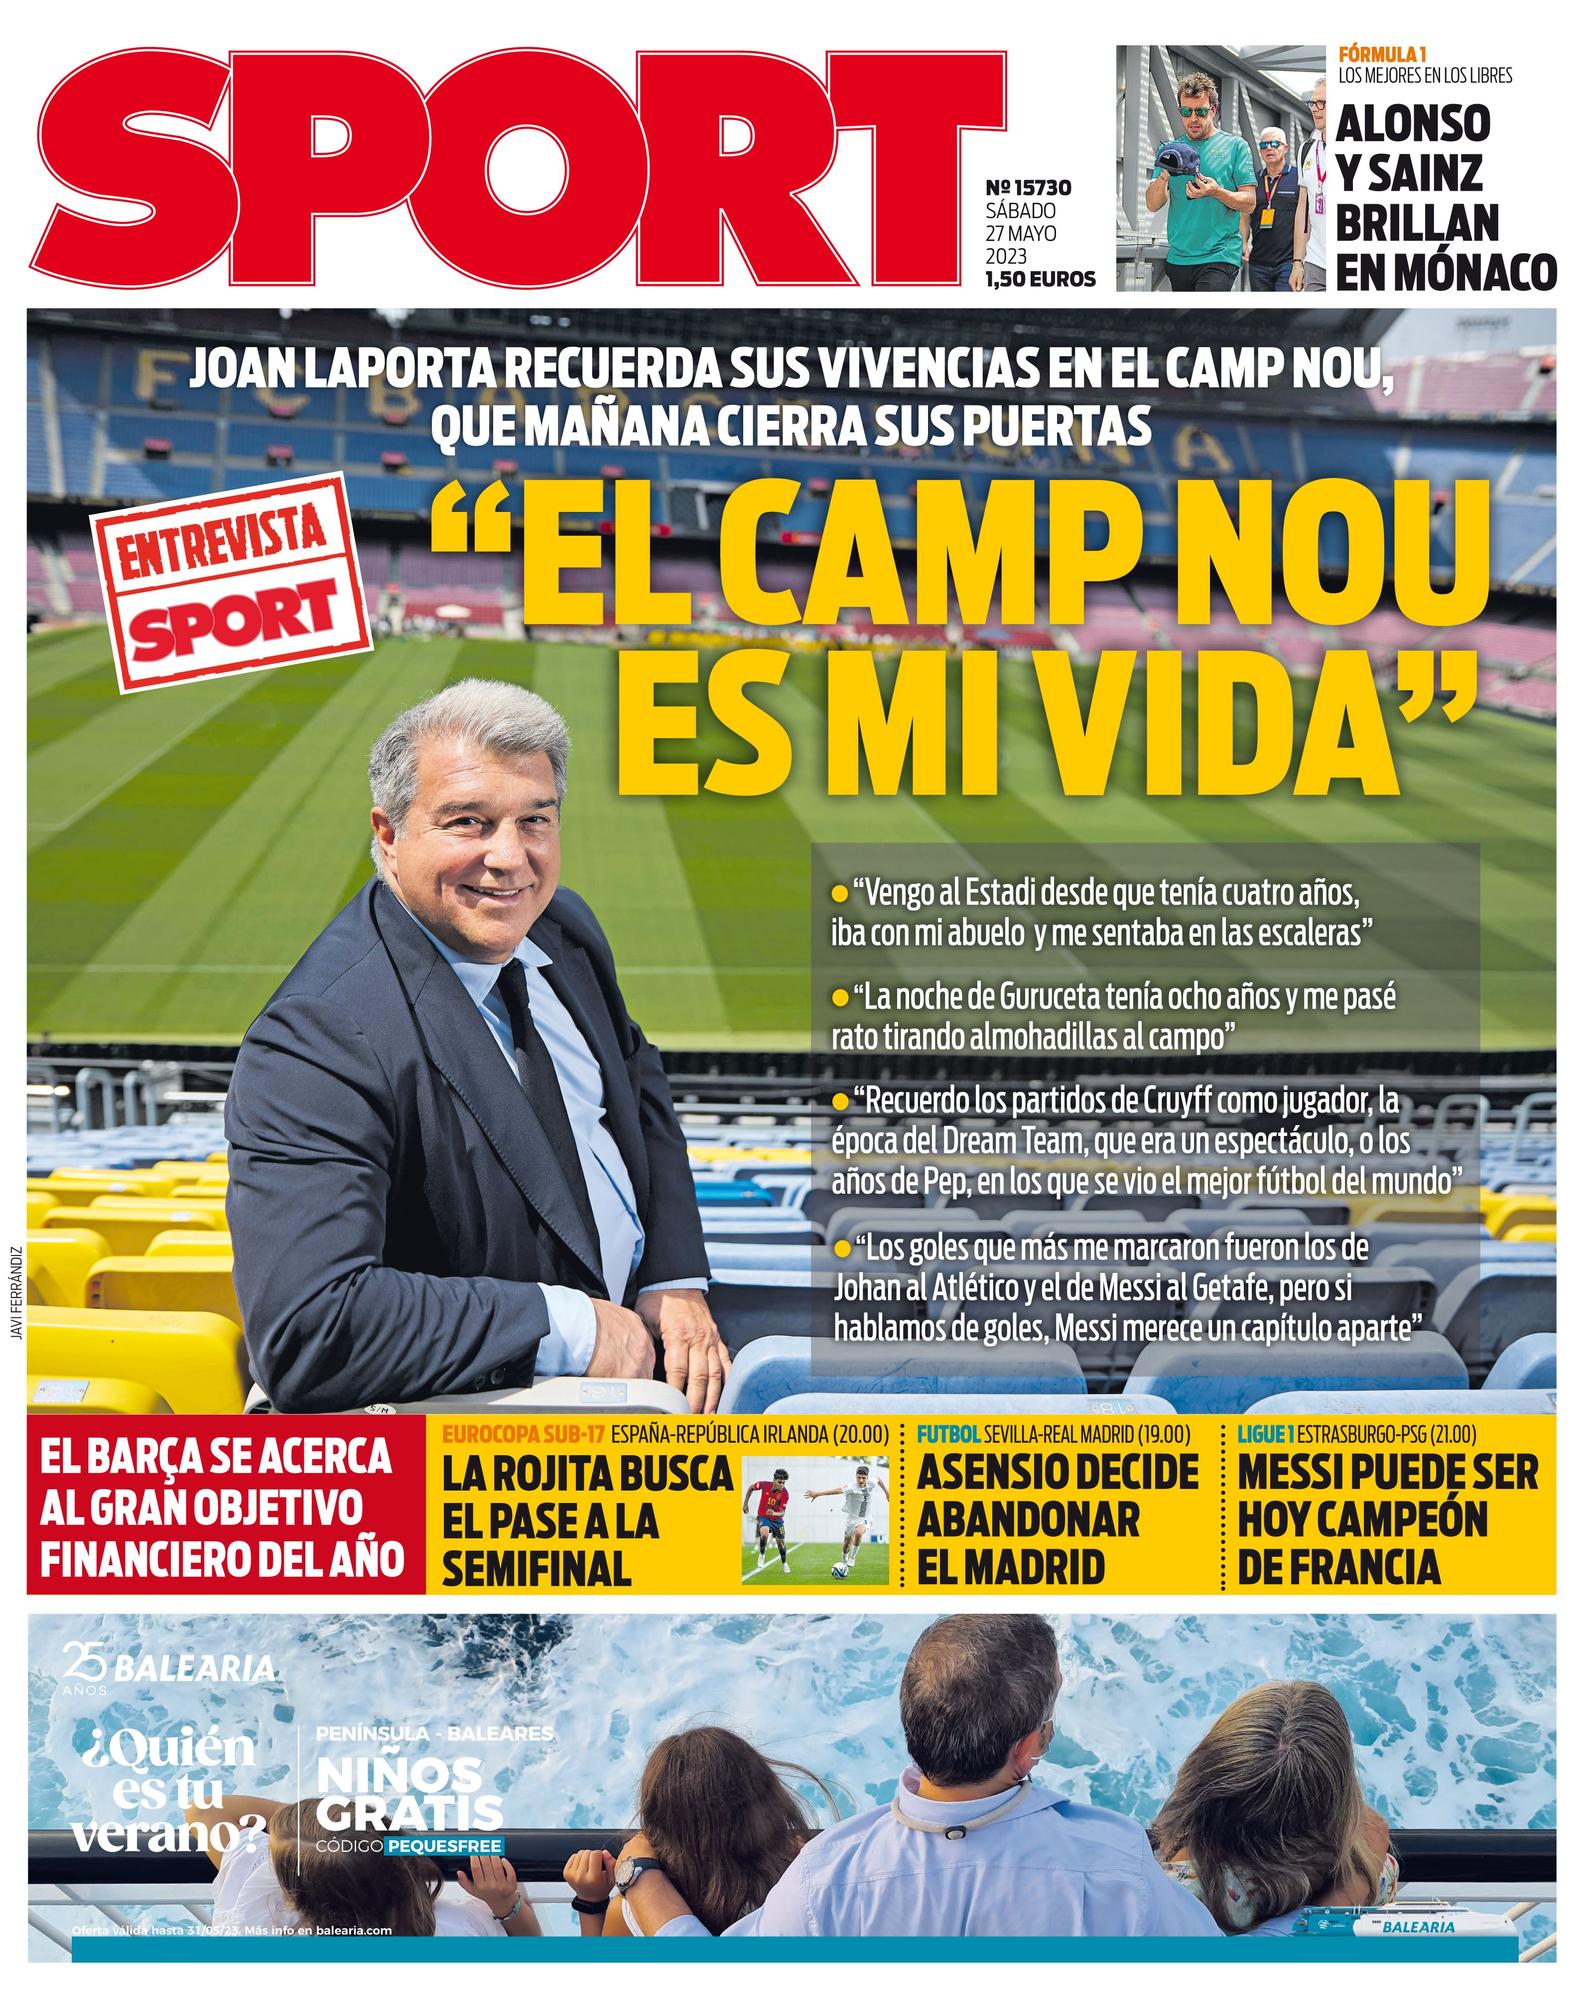 This is the cover of SPORT for today, Saturday 27 May 2023